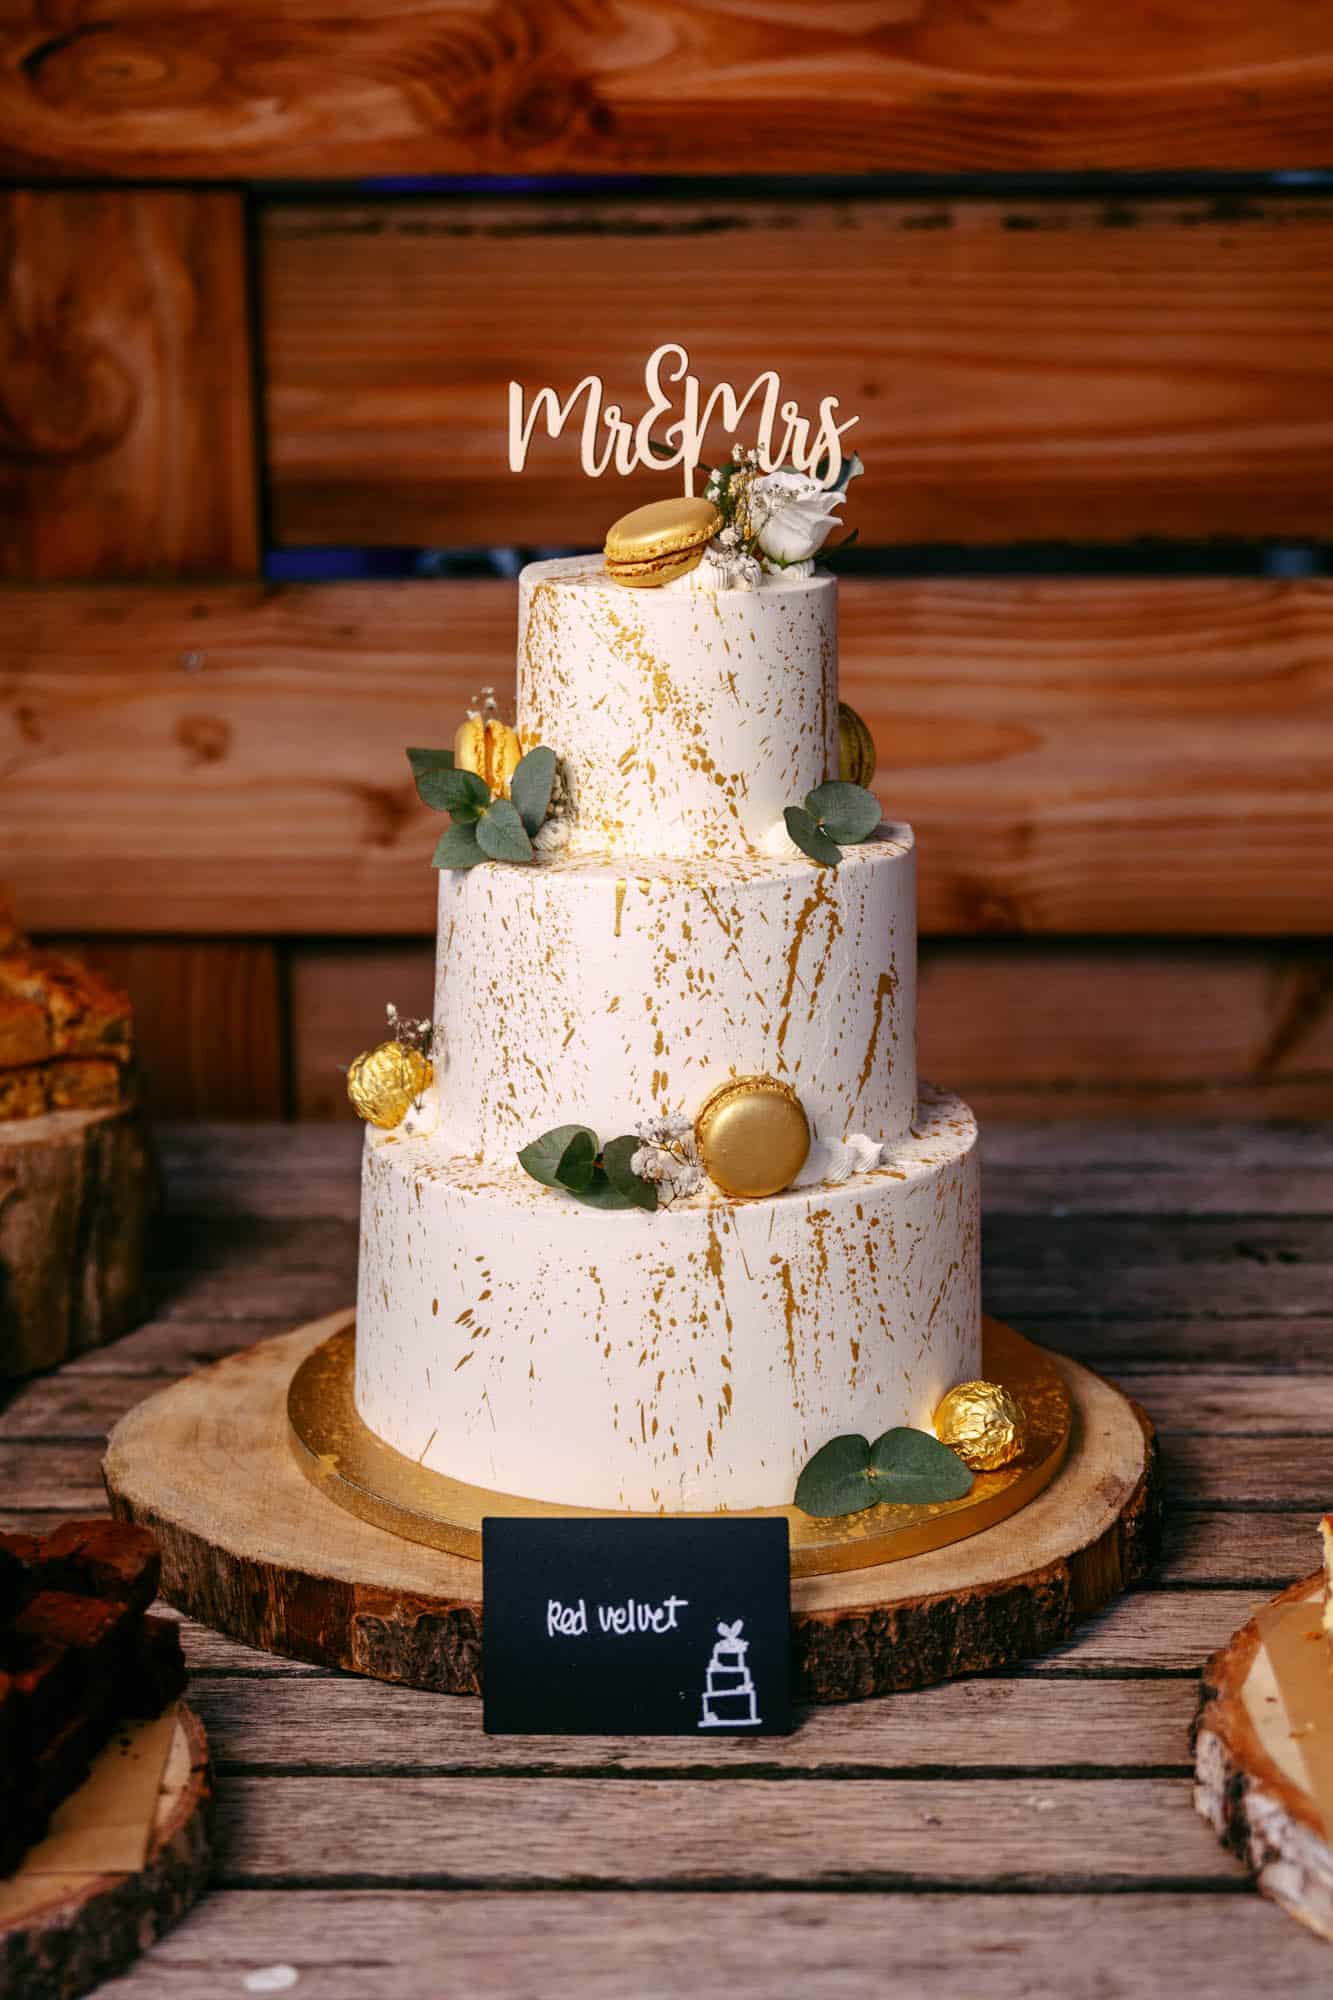 A wedding cake stands on a wooden table.